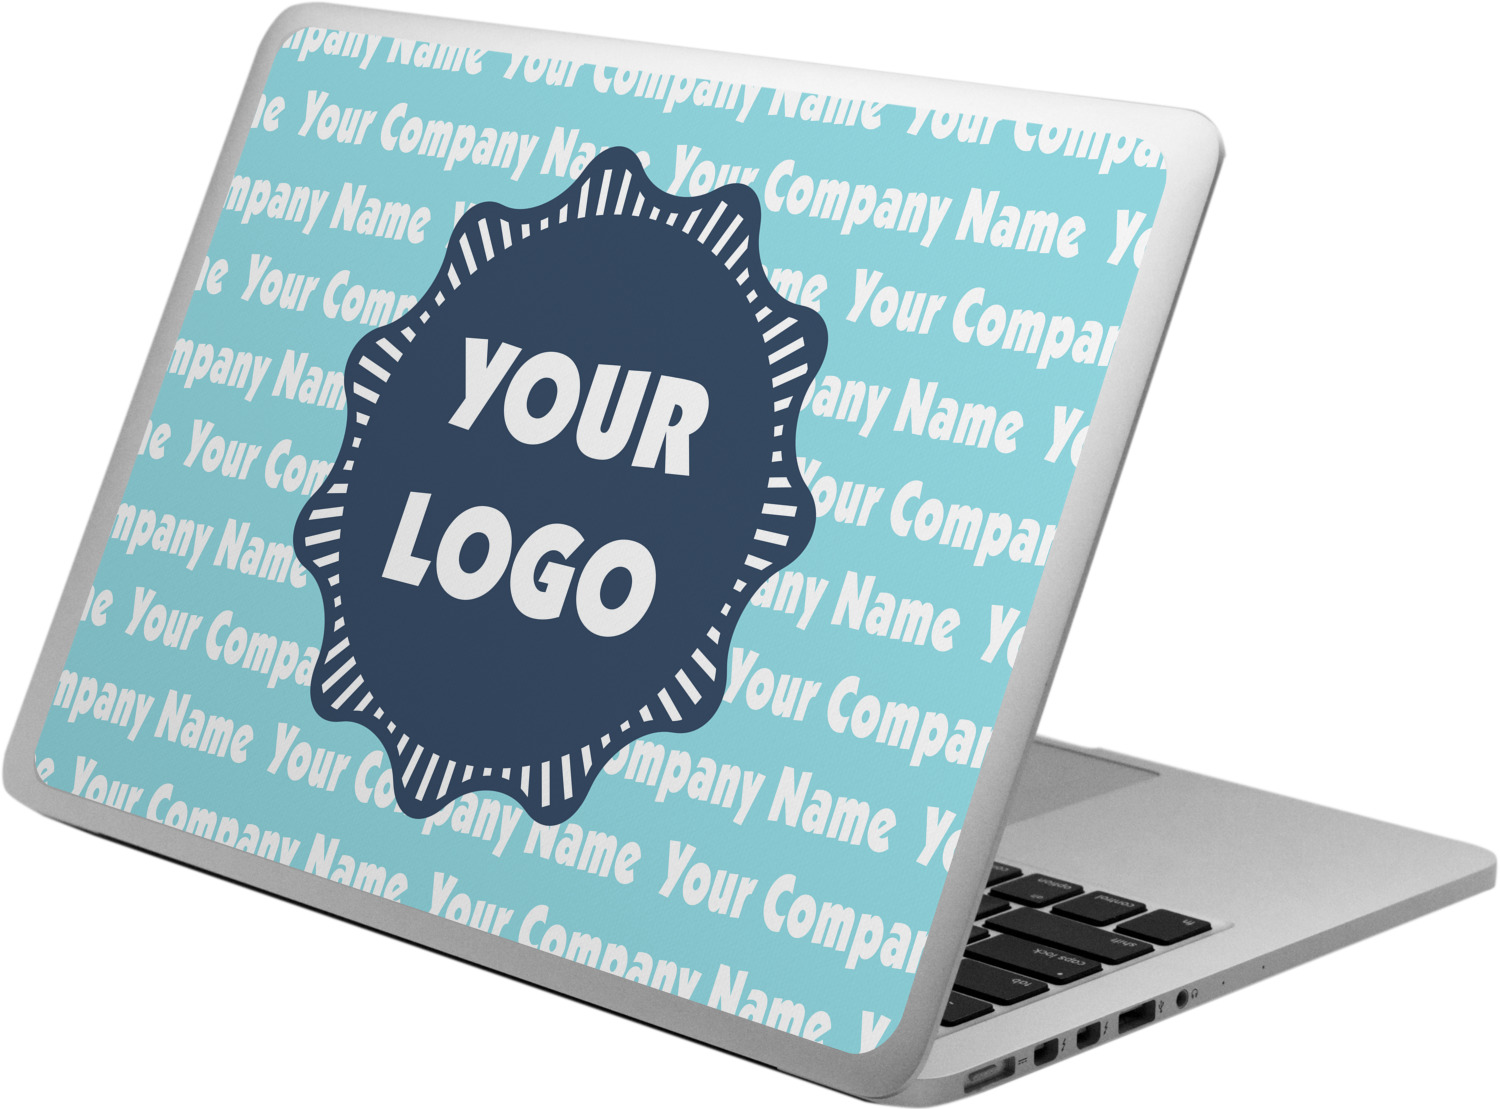 10-17 Universal Notebook Computer Skin Sticker Decal w. Your Personalized  Name